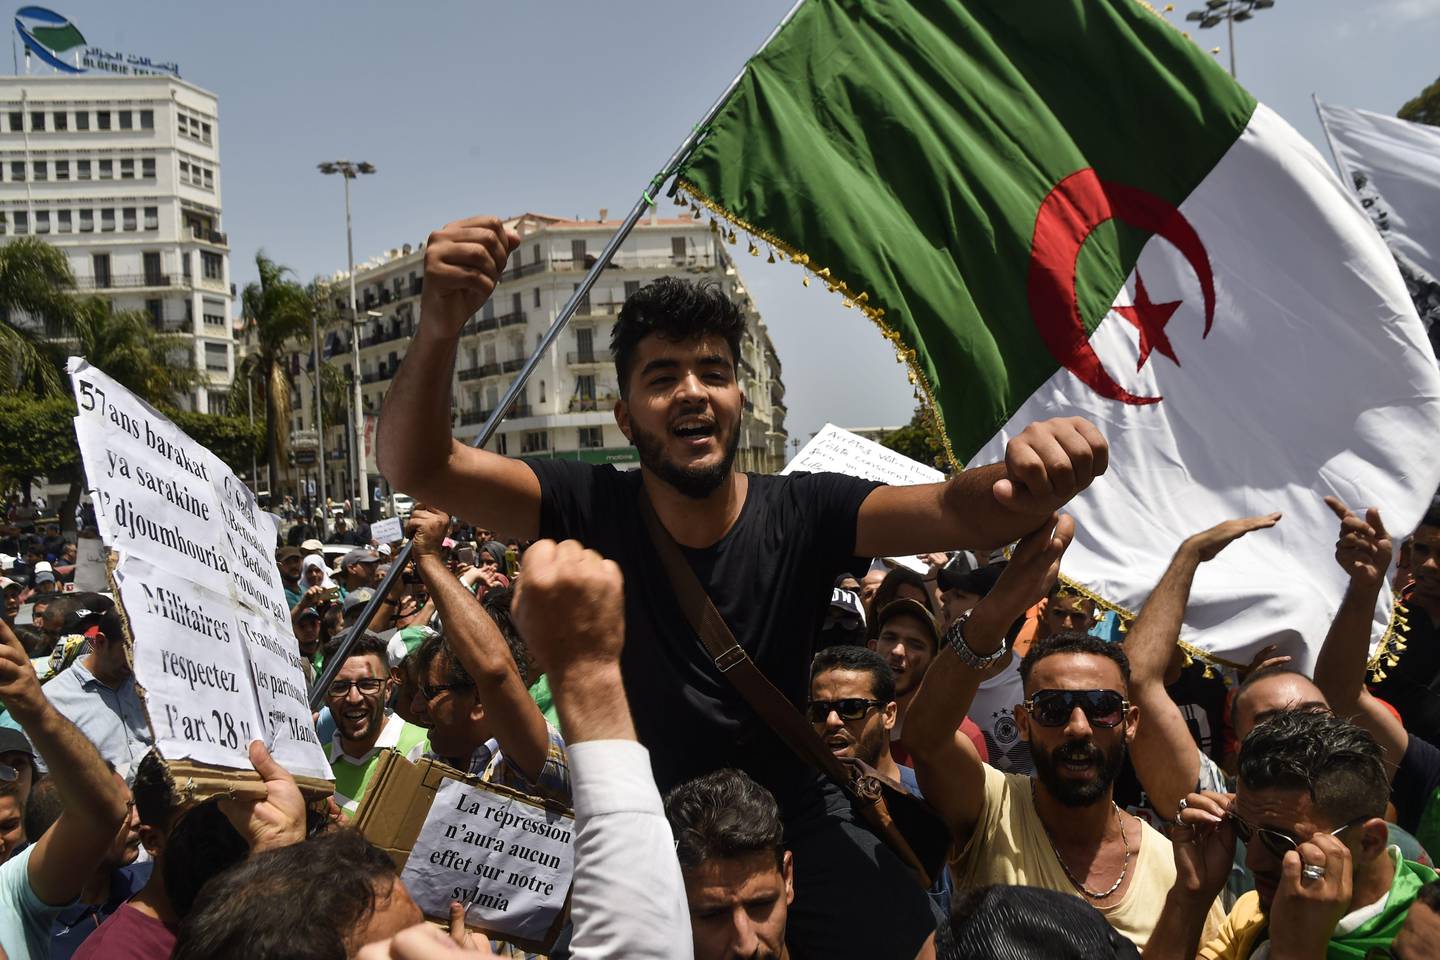 Algerian demonstrators wave a national flag and carry placards staing their demands as they take part in a protest in the streets of the capital Algiers on July 9, 2019. - Hundreds of Algerian students and teachers demonstrated today for the 20th consecutive week, demanding a "regime change" and the release of "political detainees," said an AFP journalist. (Photo by RYAD KRAMDI / AFP)